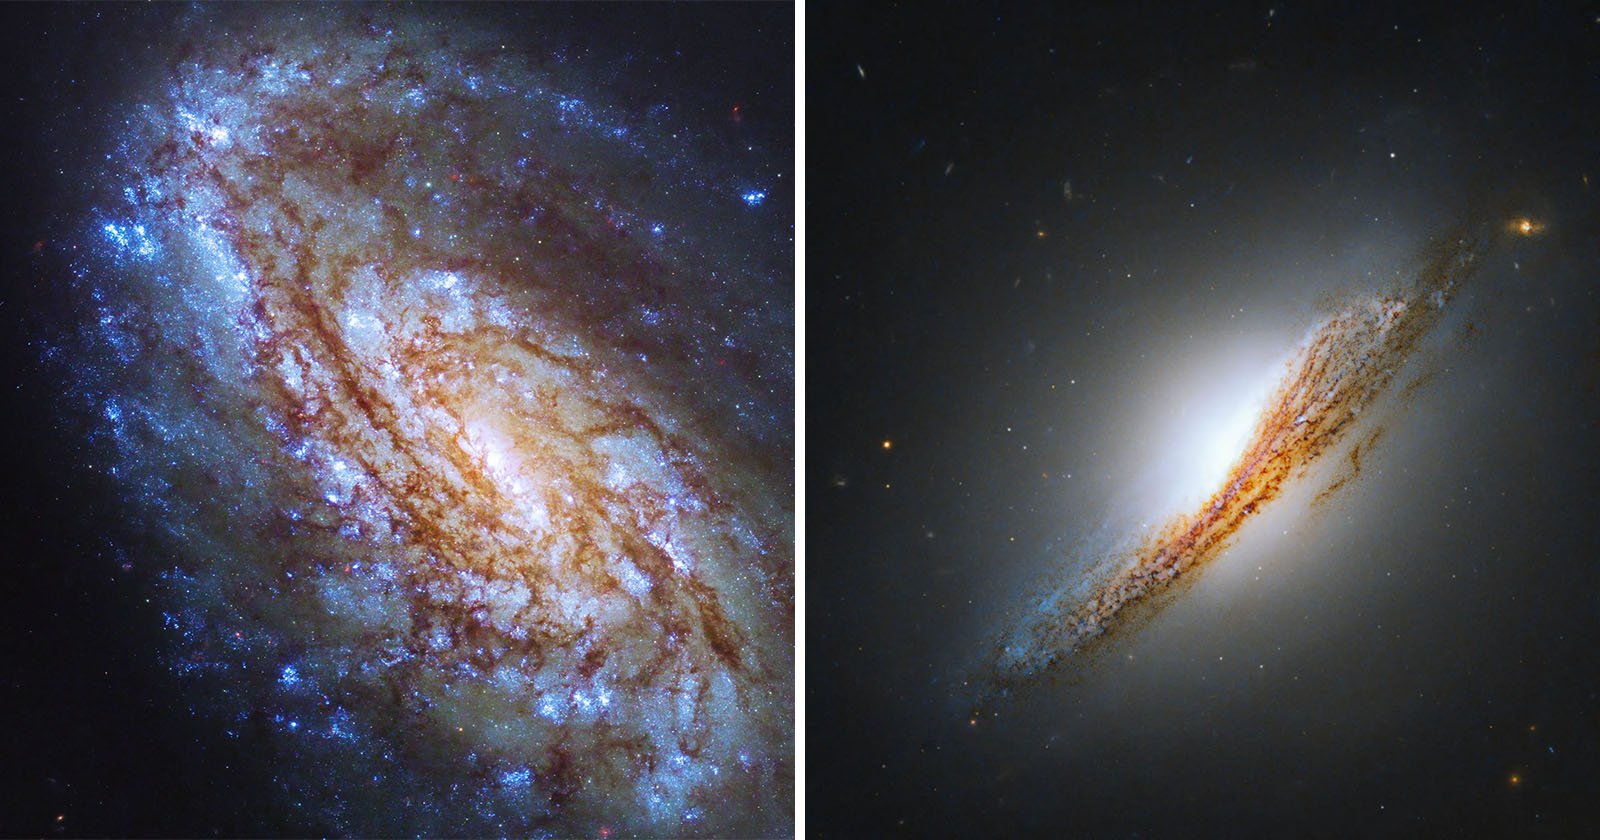 Galaxies Galore: Hubble Celebrates Galaxies With New Photos All Week